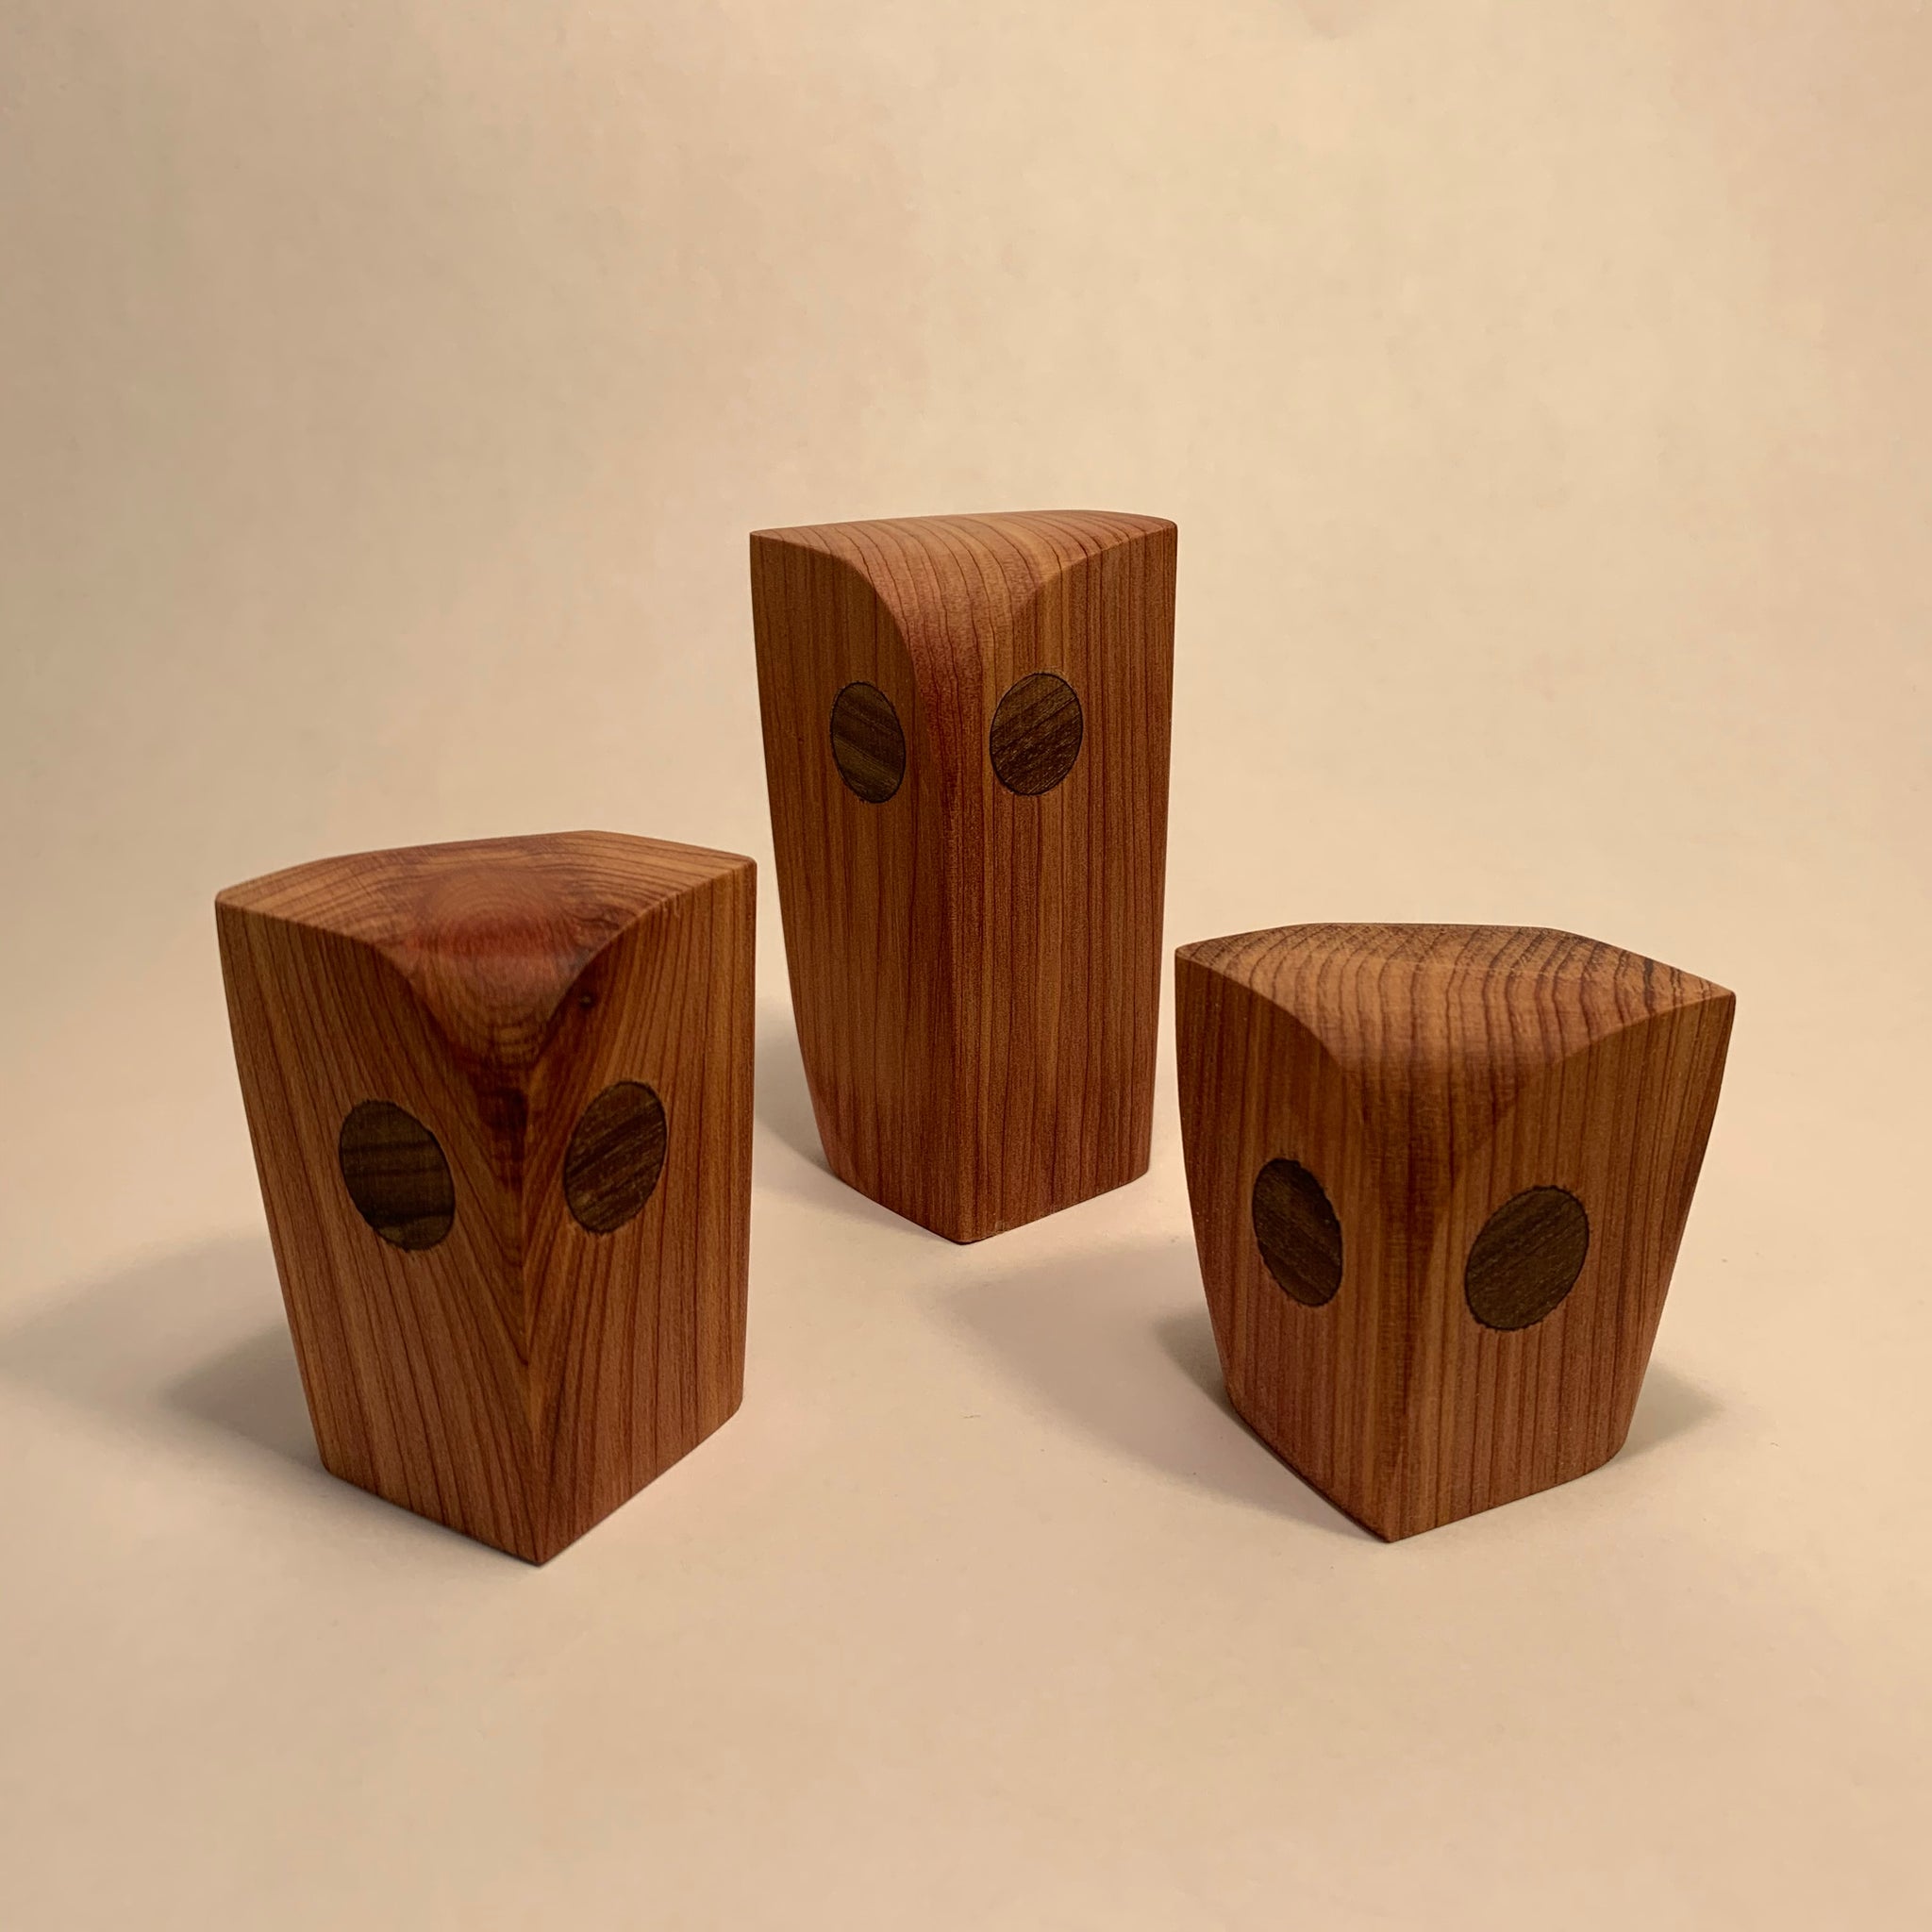 Hand Crafted Owls by Peter Tegu